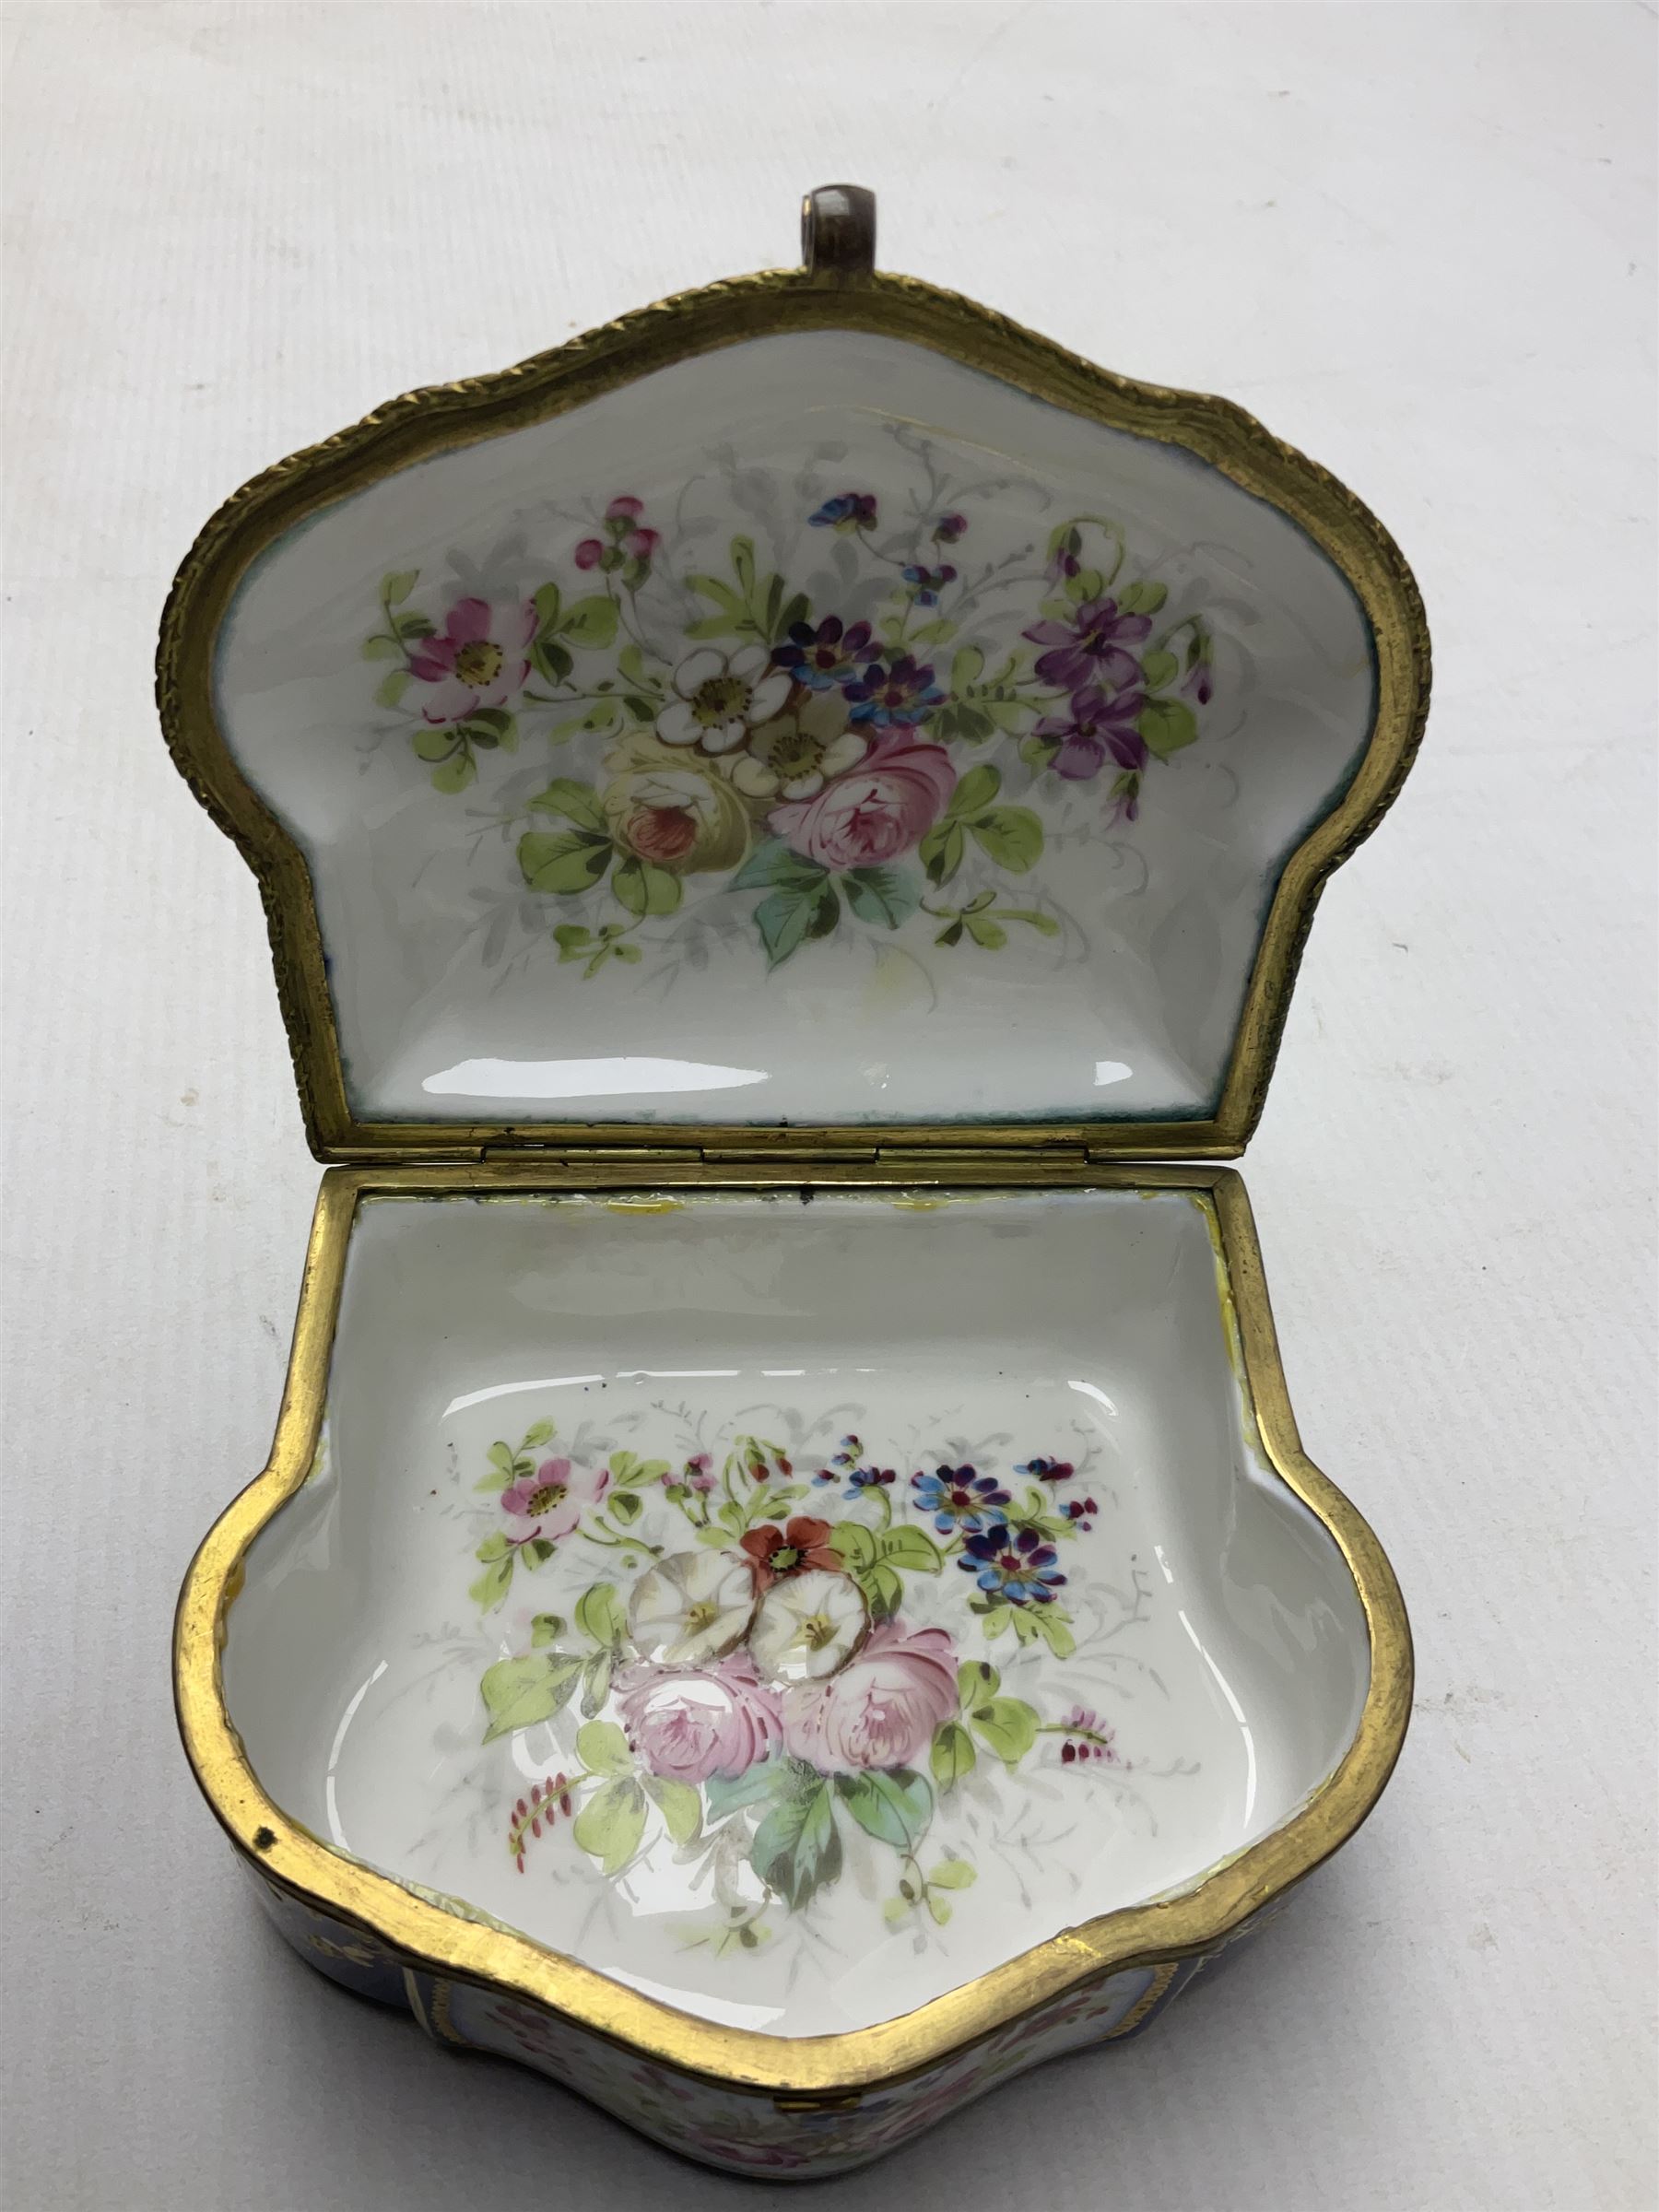 Sevres style late 19th/early 20th century trinket box decorated in the rococo style - Image 6 of 9